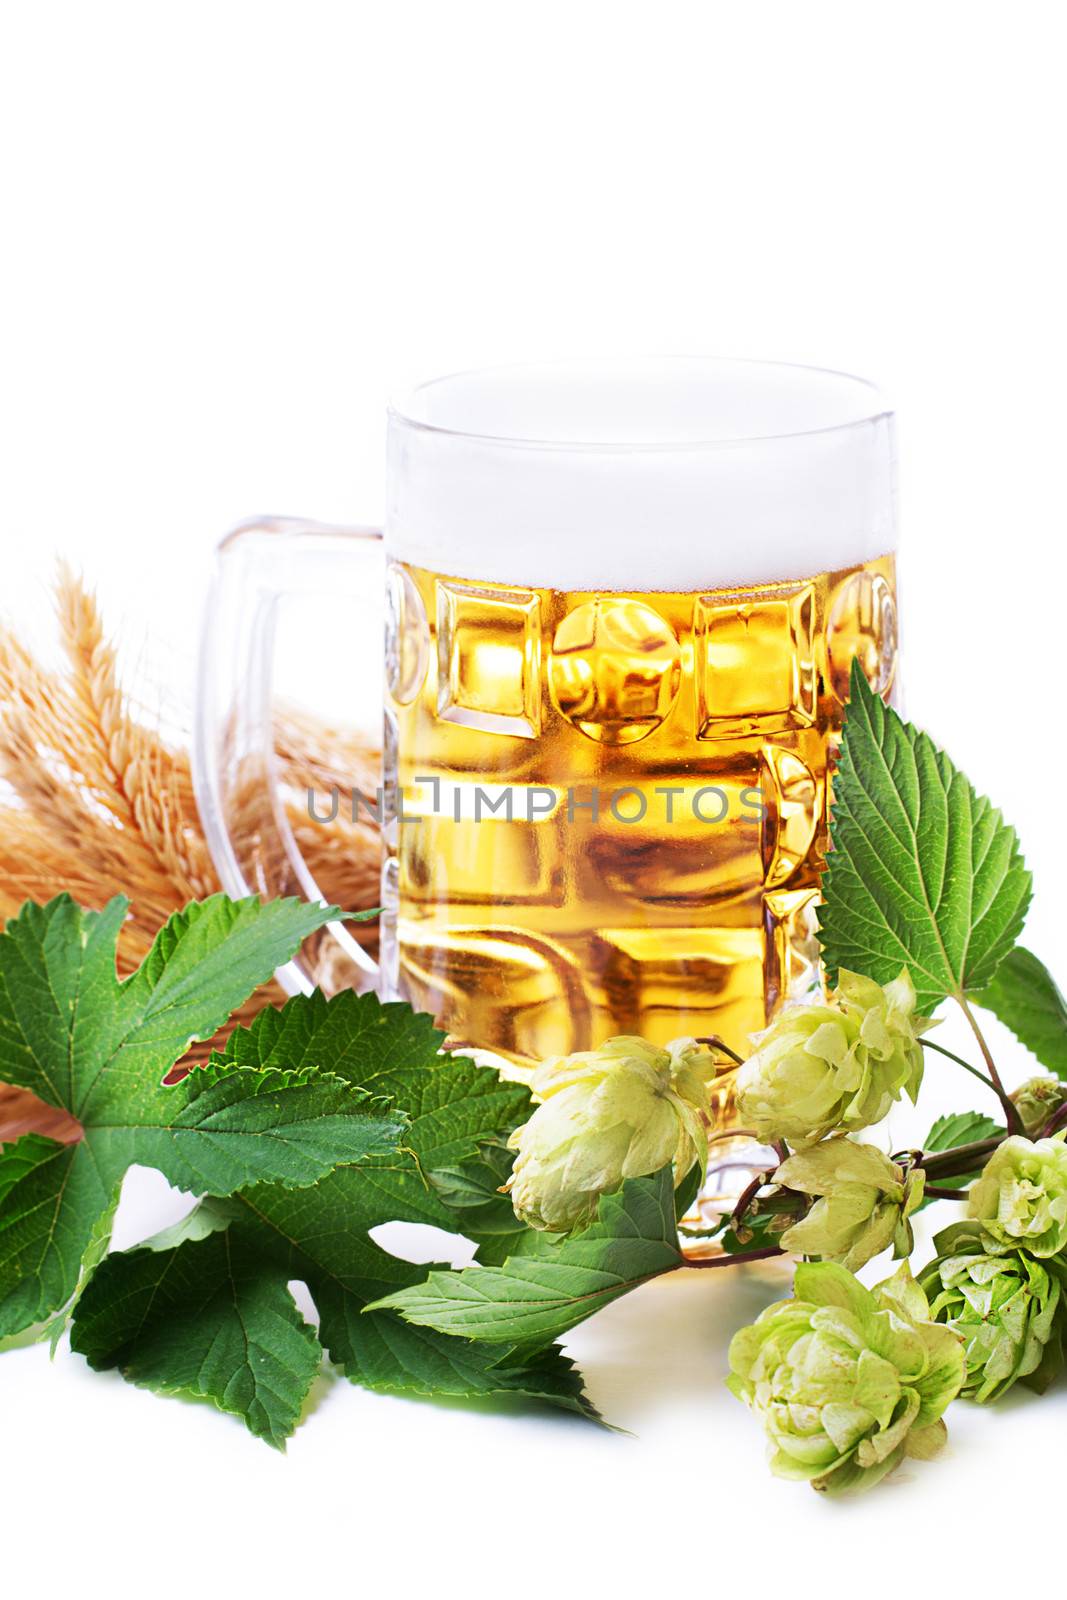 Mug of golden beer with hop leaves and wheat by Angel_a